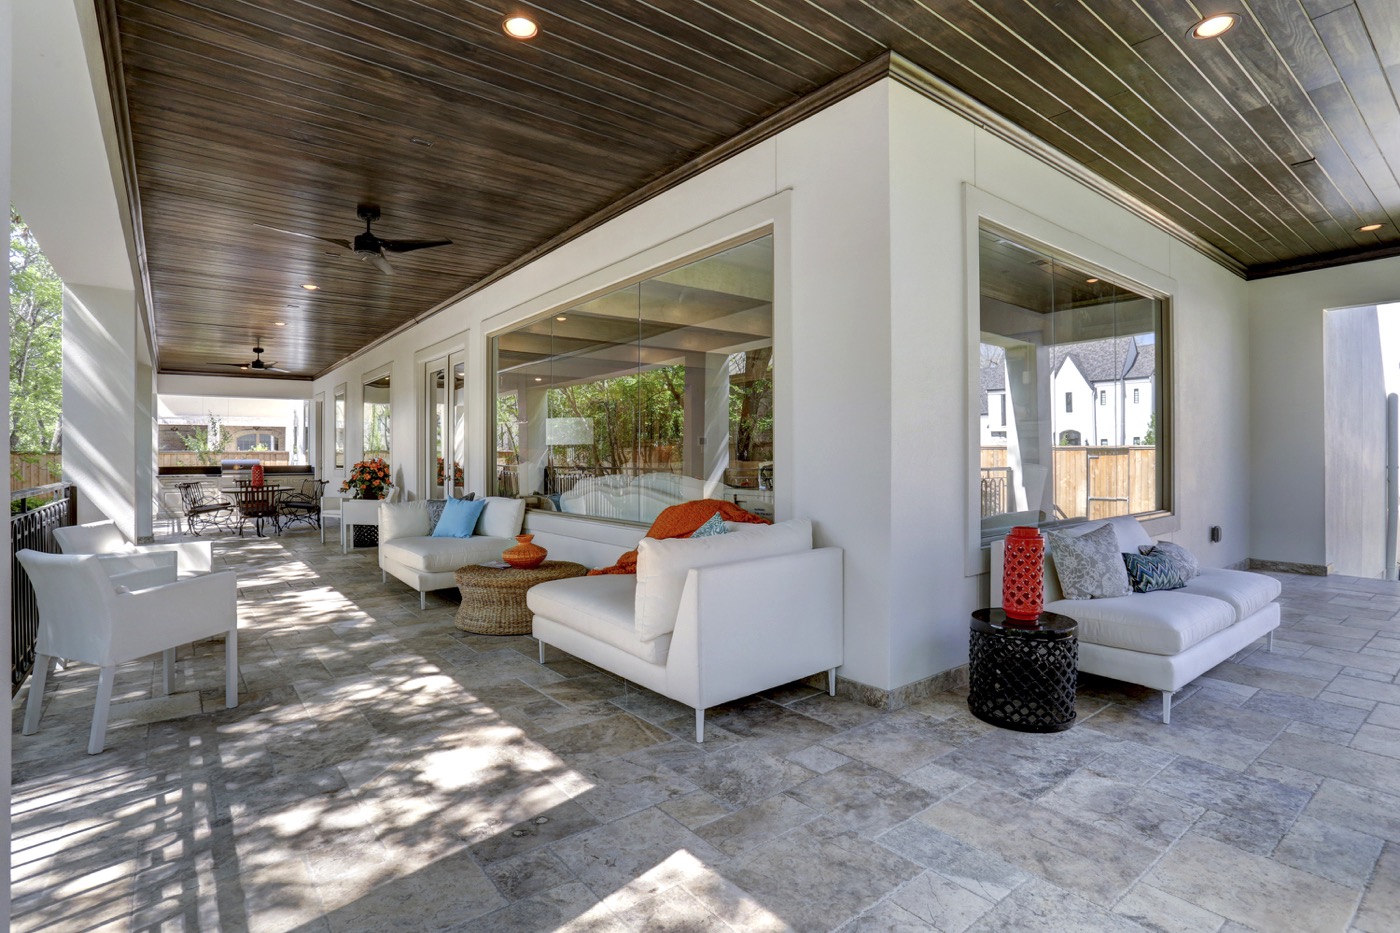 This spacious and shaded outdoor loggia doubles as a secondary living room and dining room